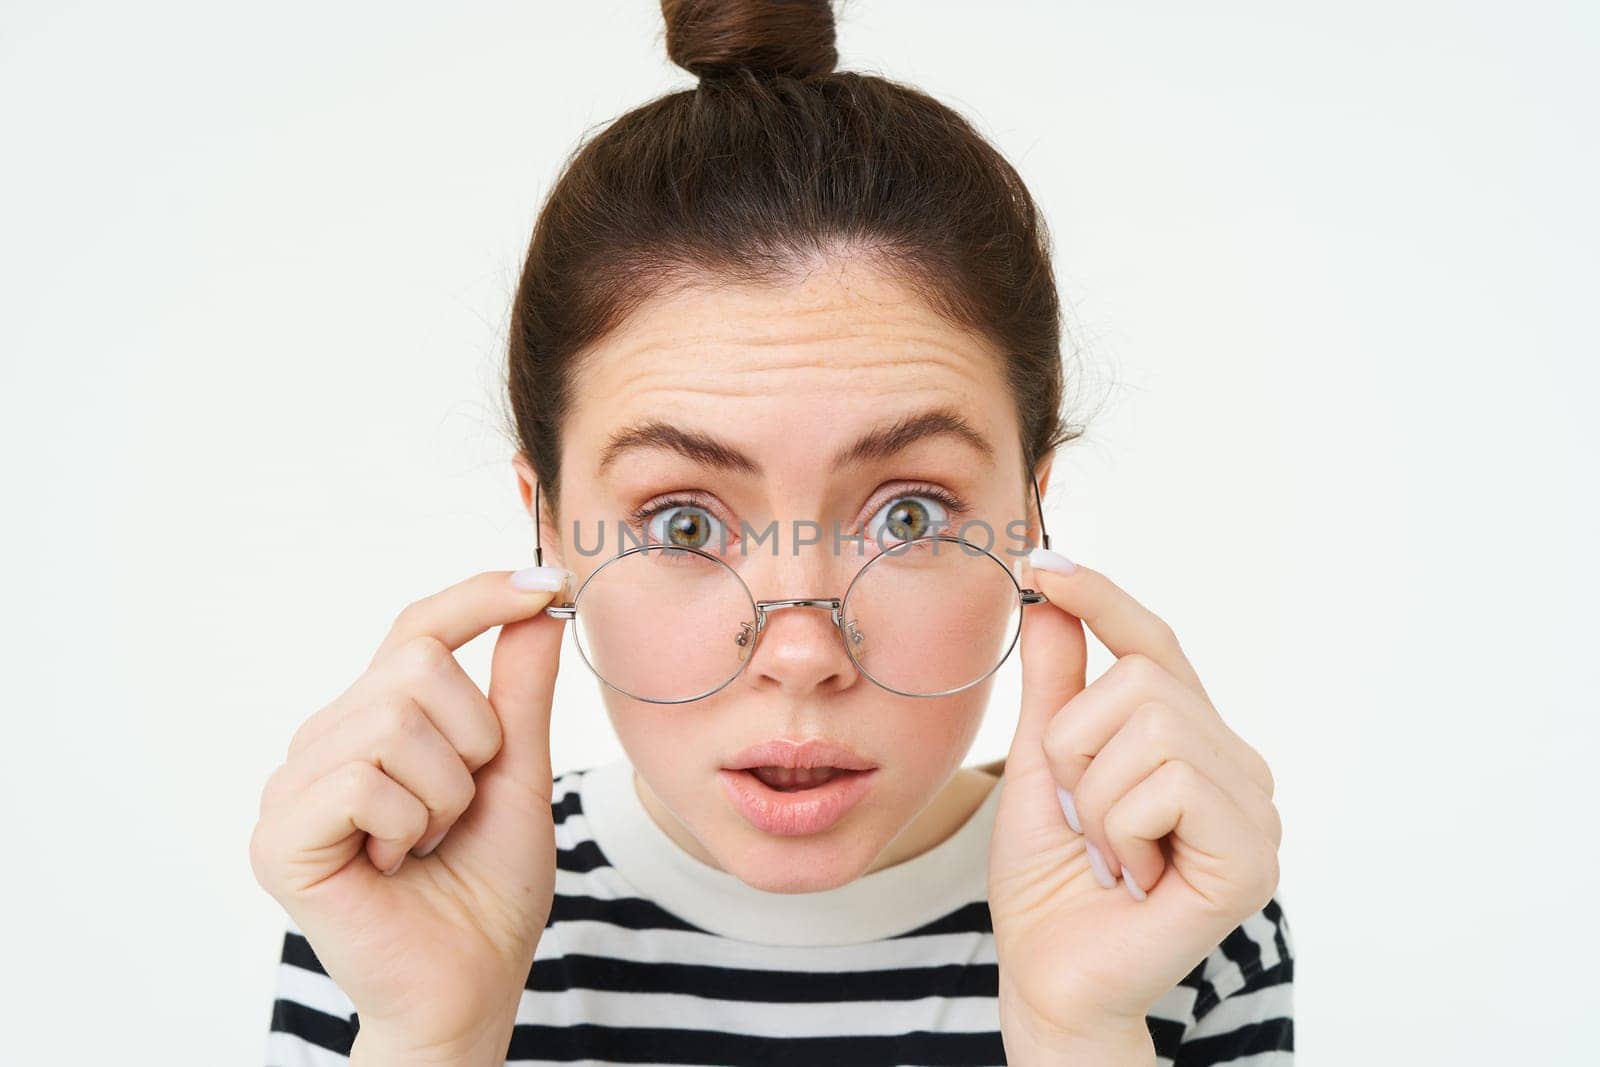 Portrait of woman leaning towards camera as if reading text with surprised face, takes off glasses, stands over white background. Copy space